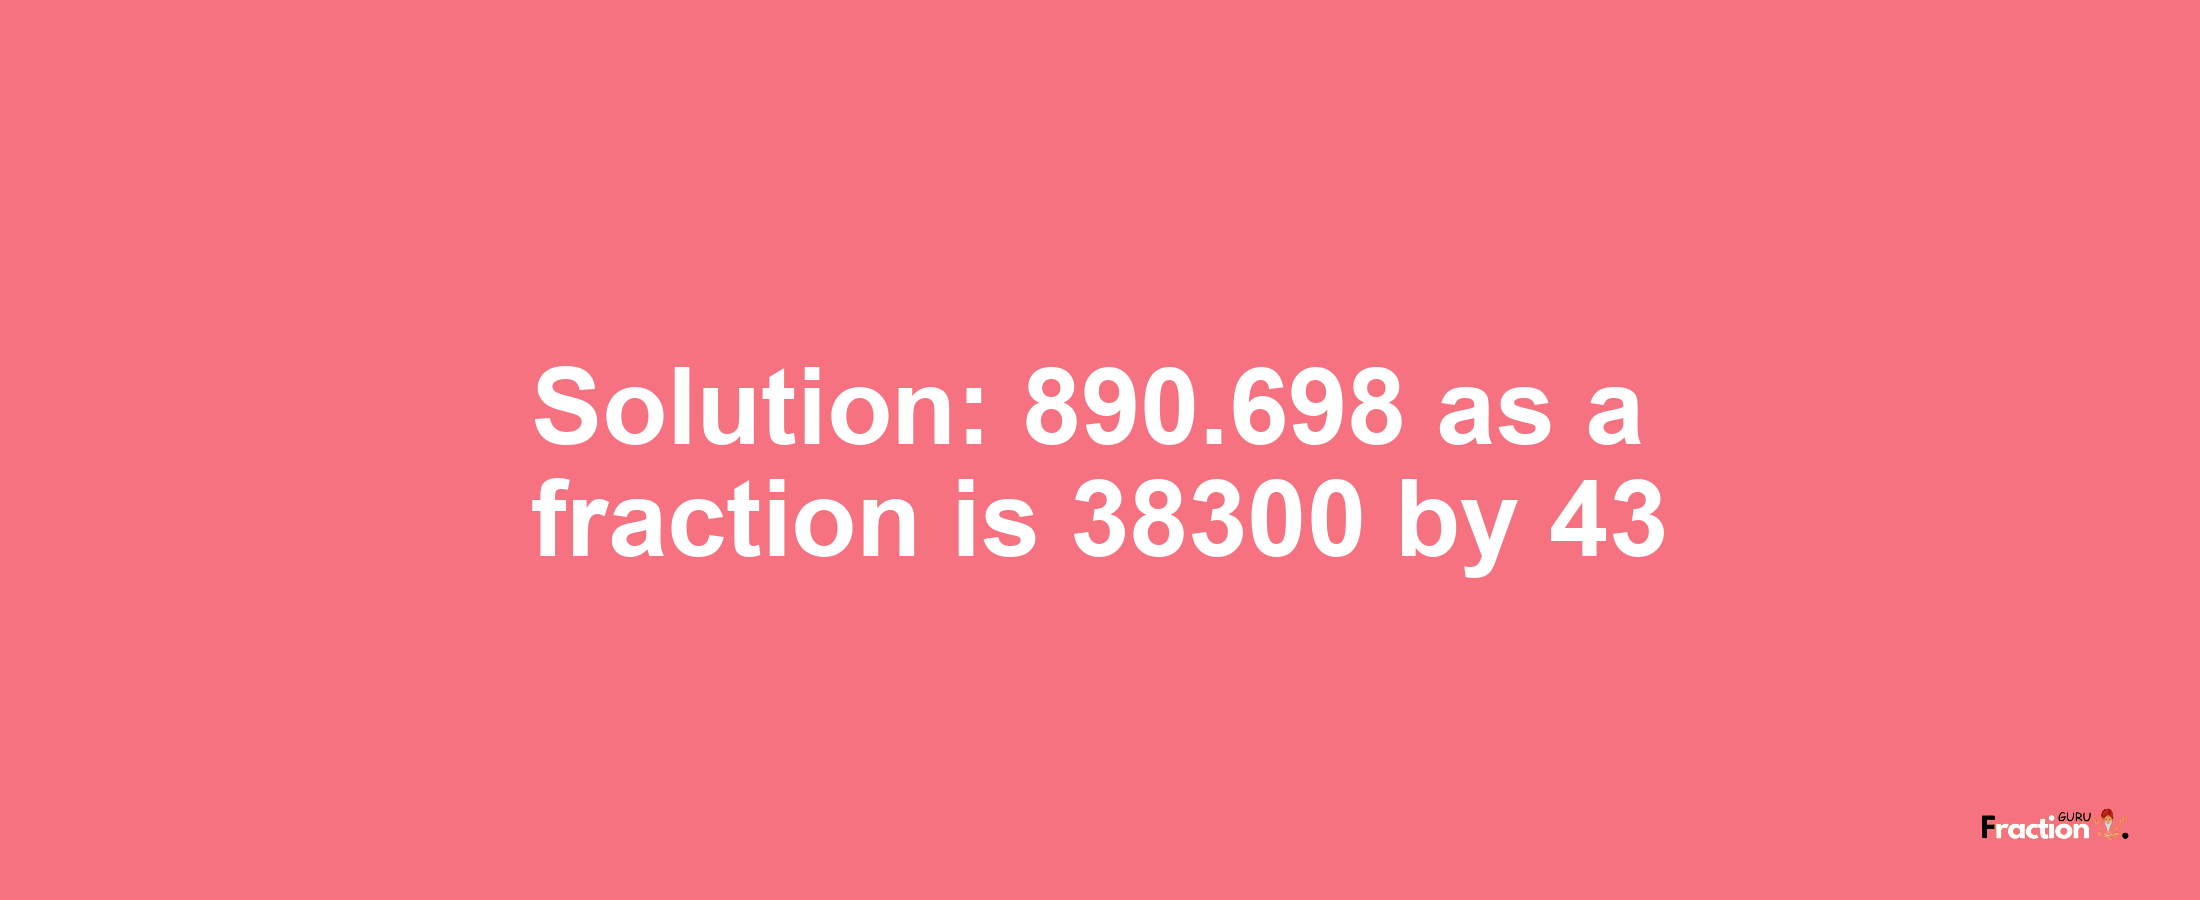 Solution:890.698 as a fraction is 38300/43